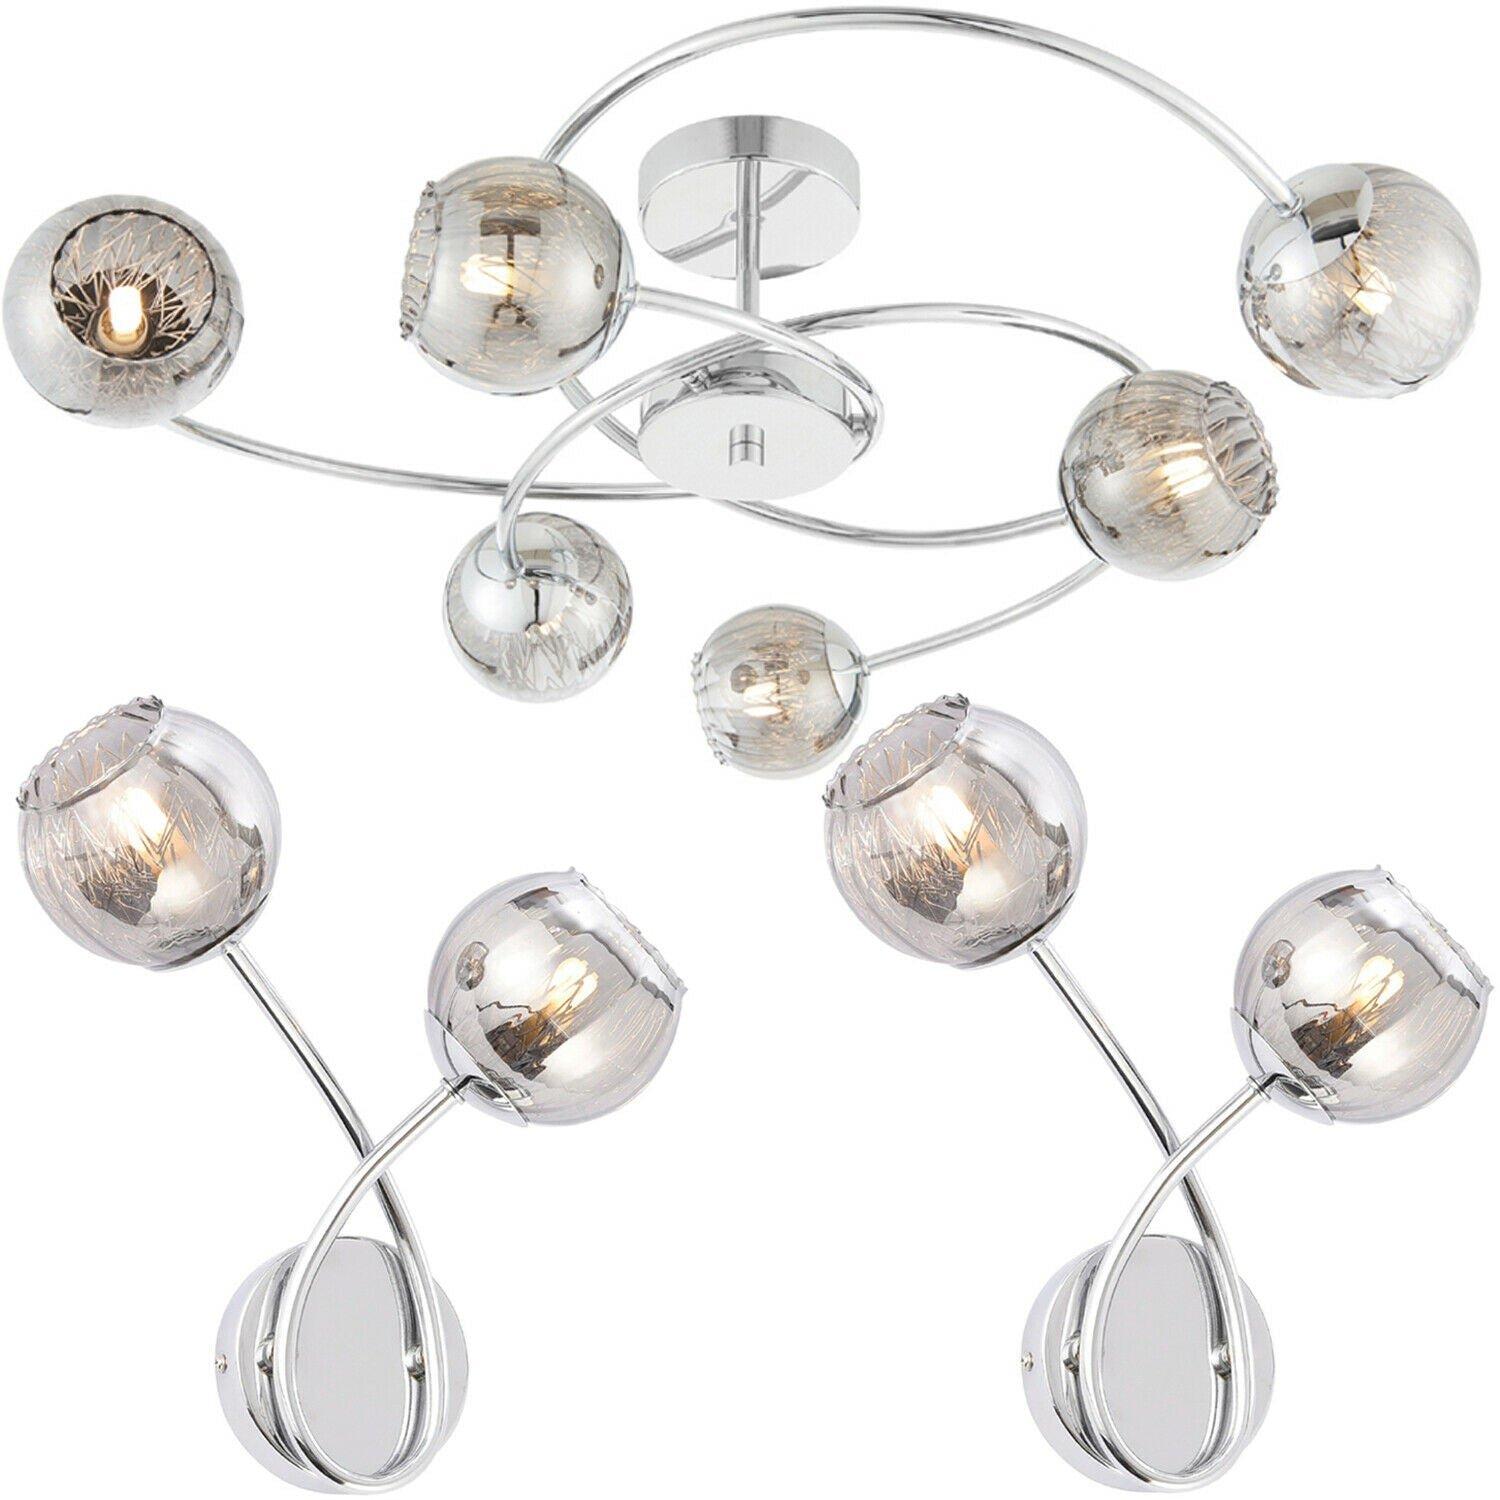 6 Arm Ceiling & 2x Wall Light Pack Chrome Smoked Glass Matching Indoor Fittings